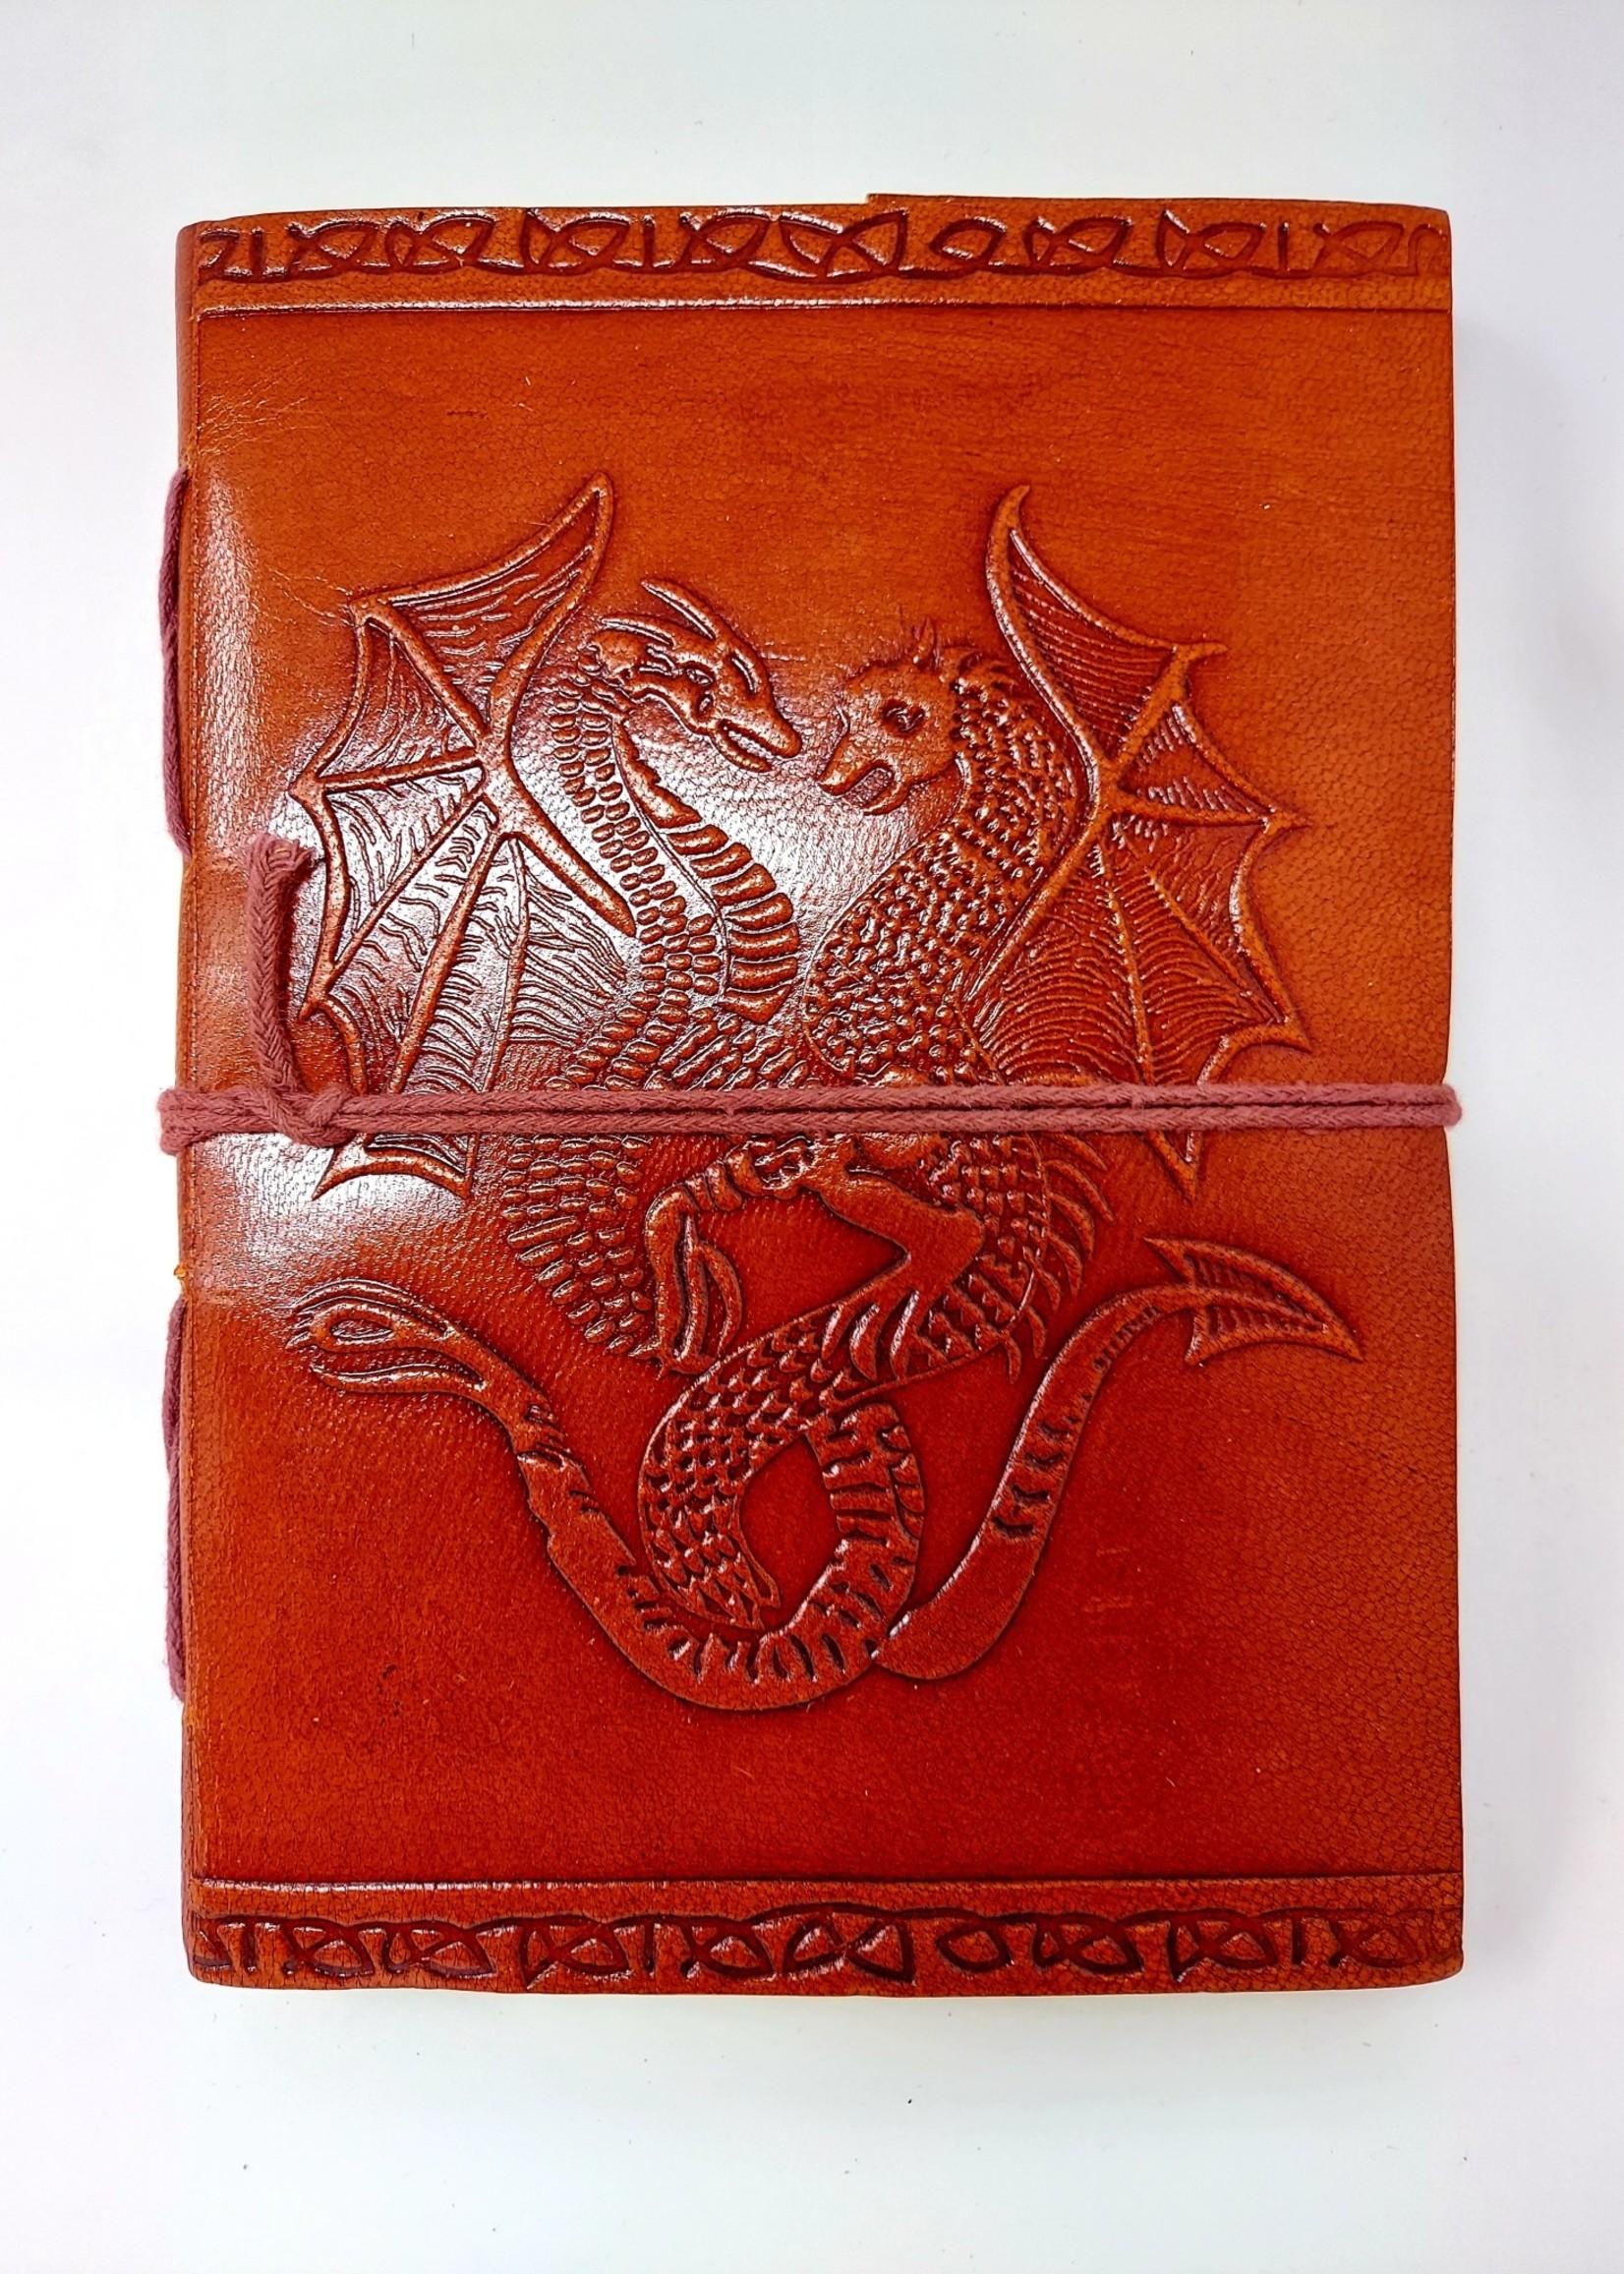 Hand Crafted Leather Journals Made in Nepal